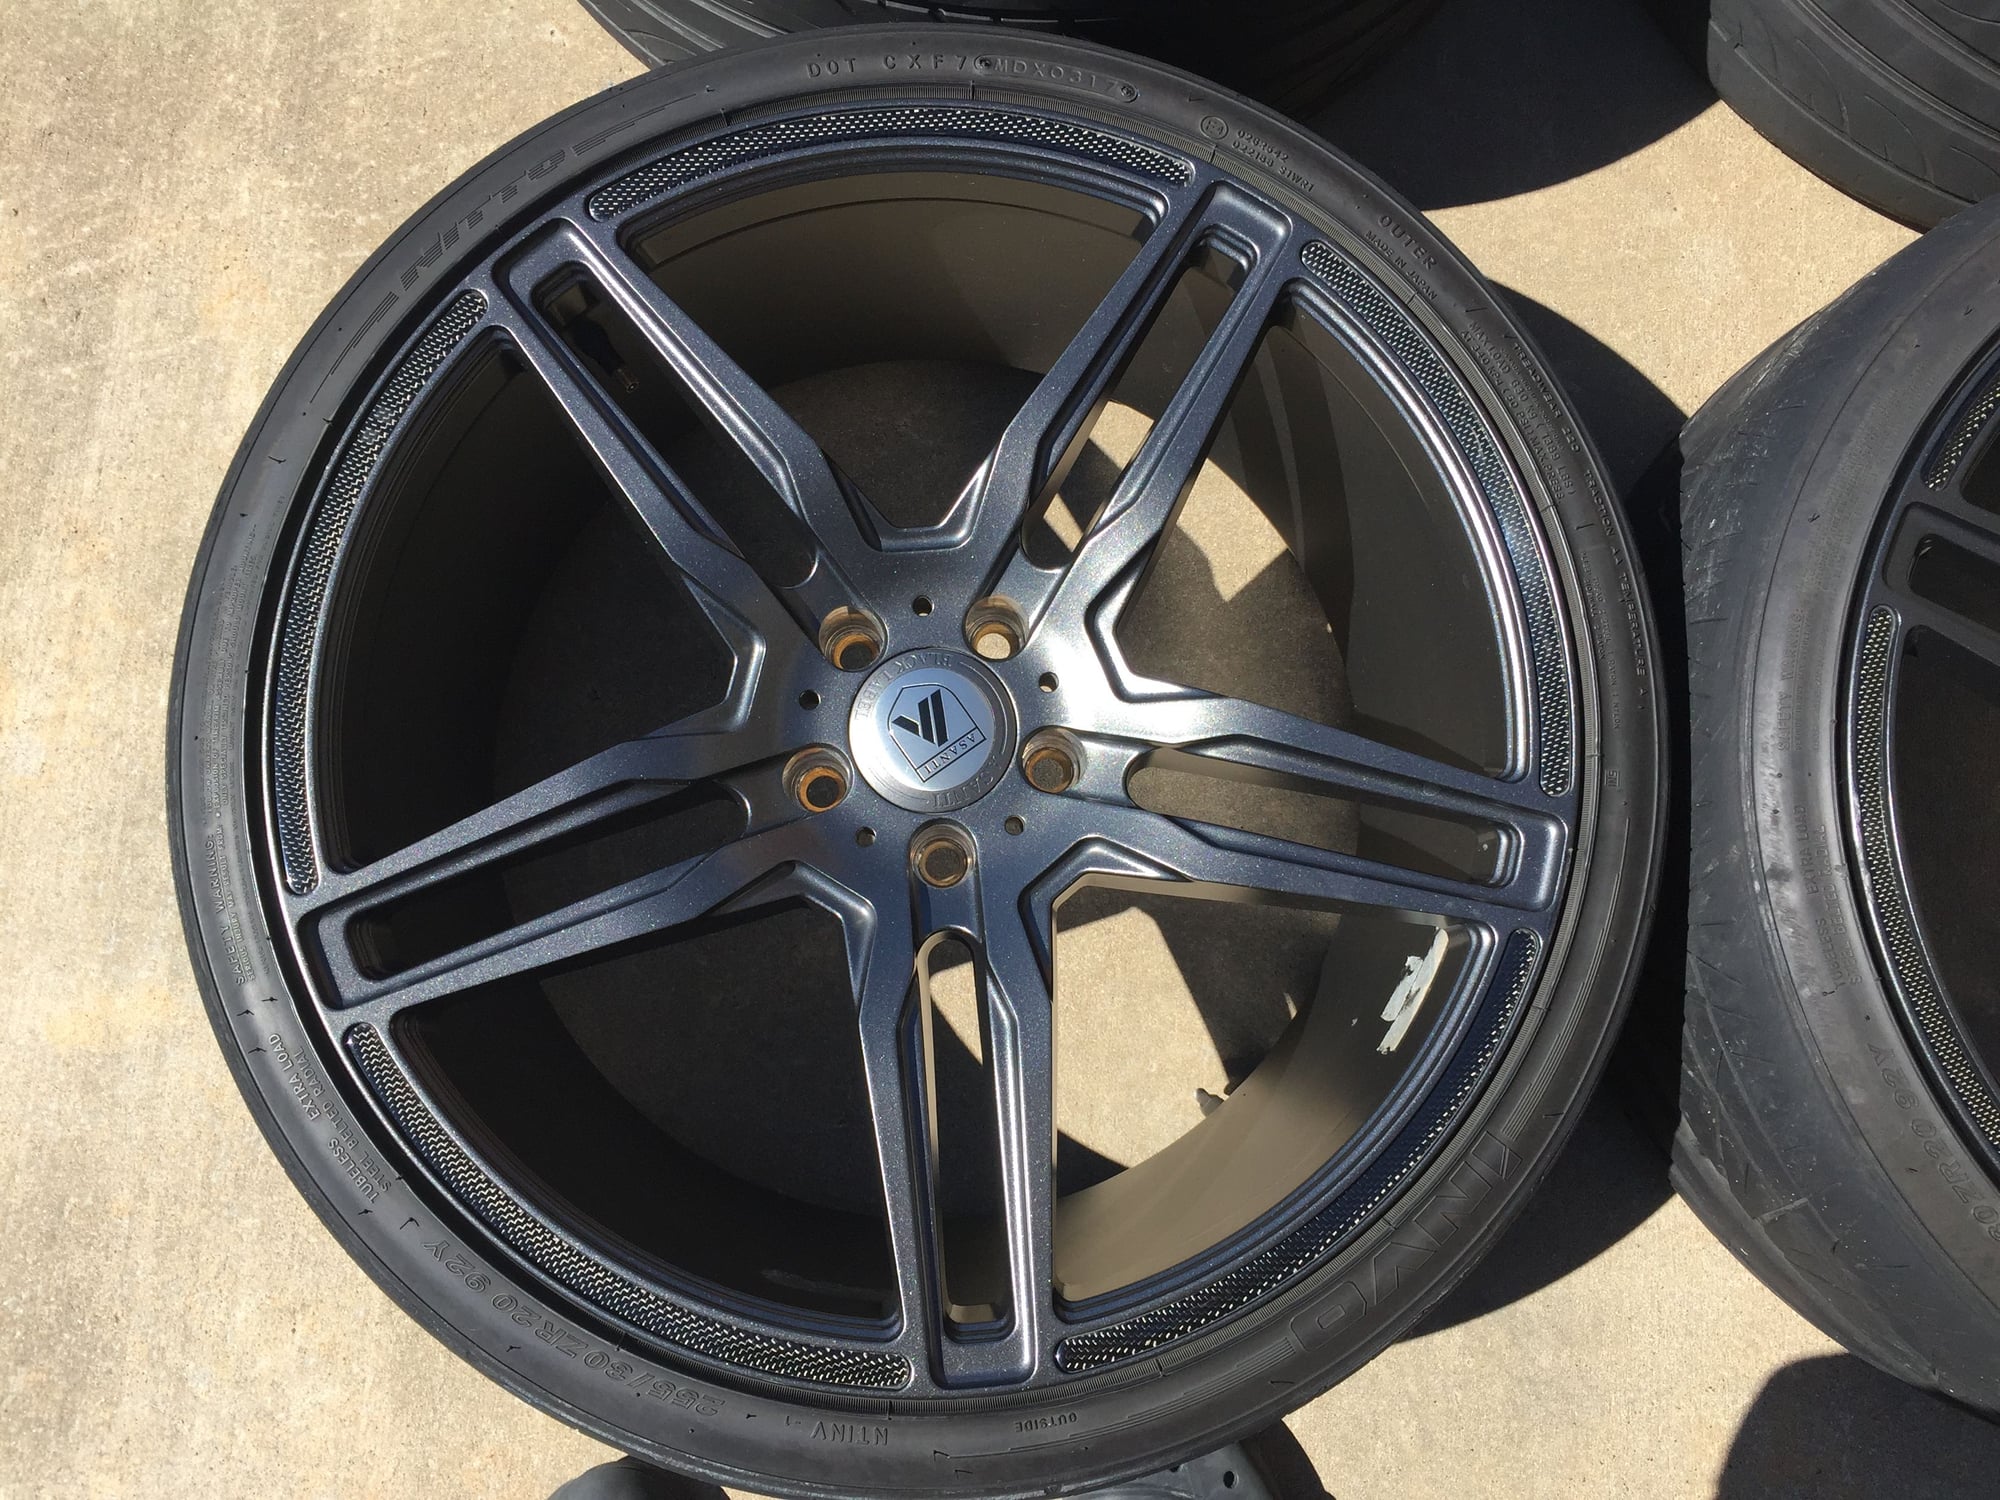 Wheels and Tires/Axles - Set of 20" Asanti ABL12s in Sapphire Matte Carbon - Used - Forney, TX 75126, United States